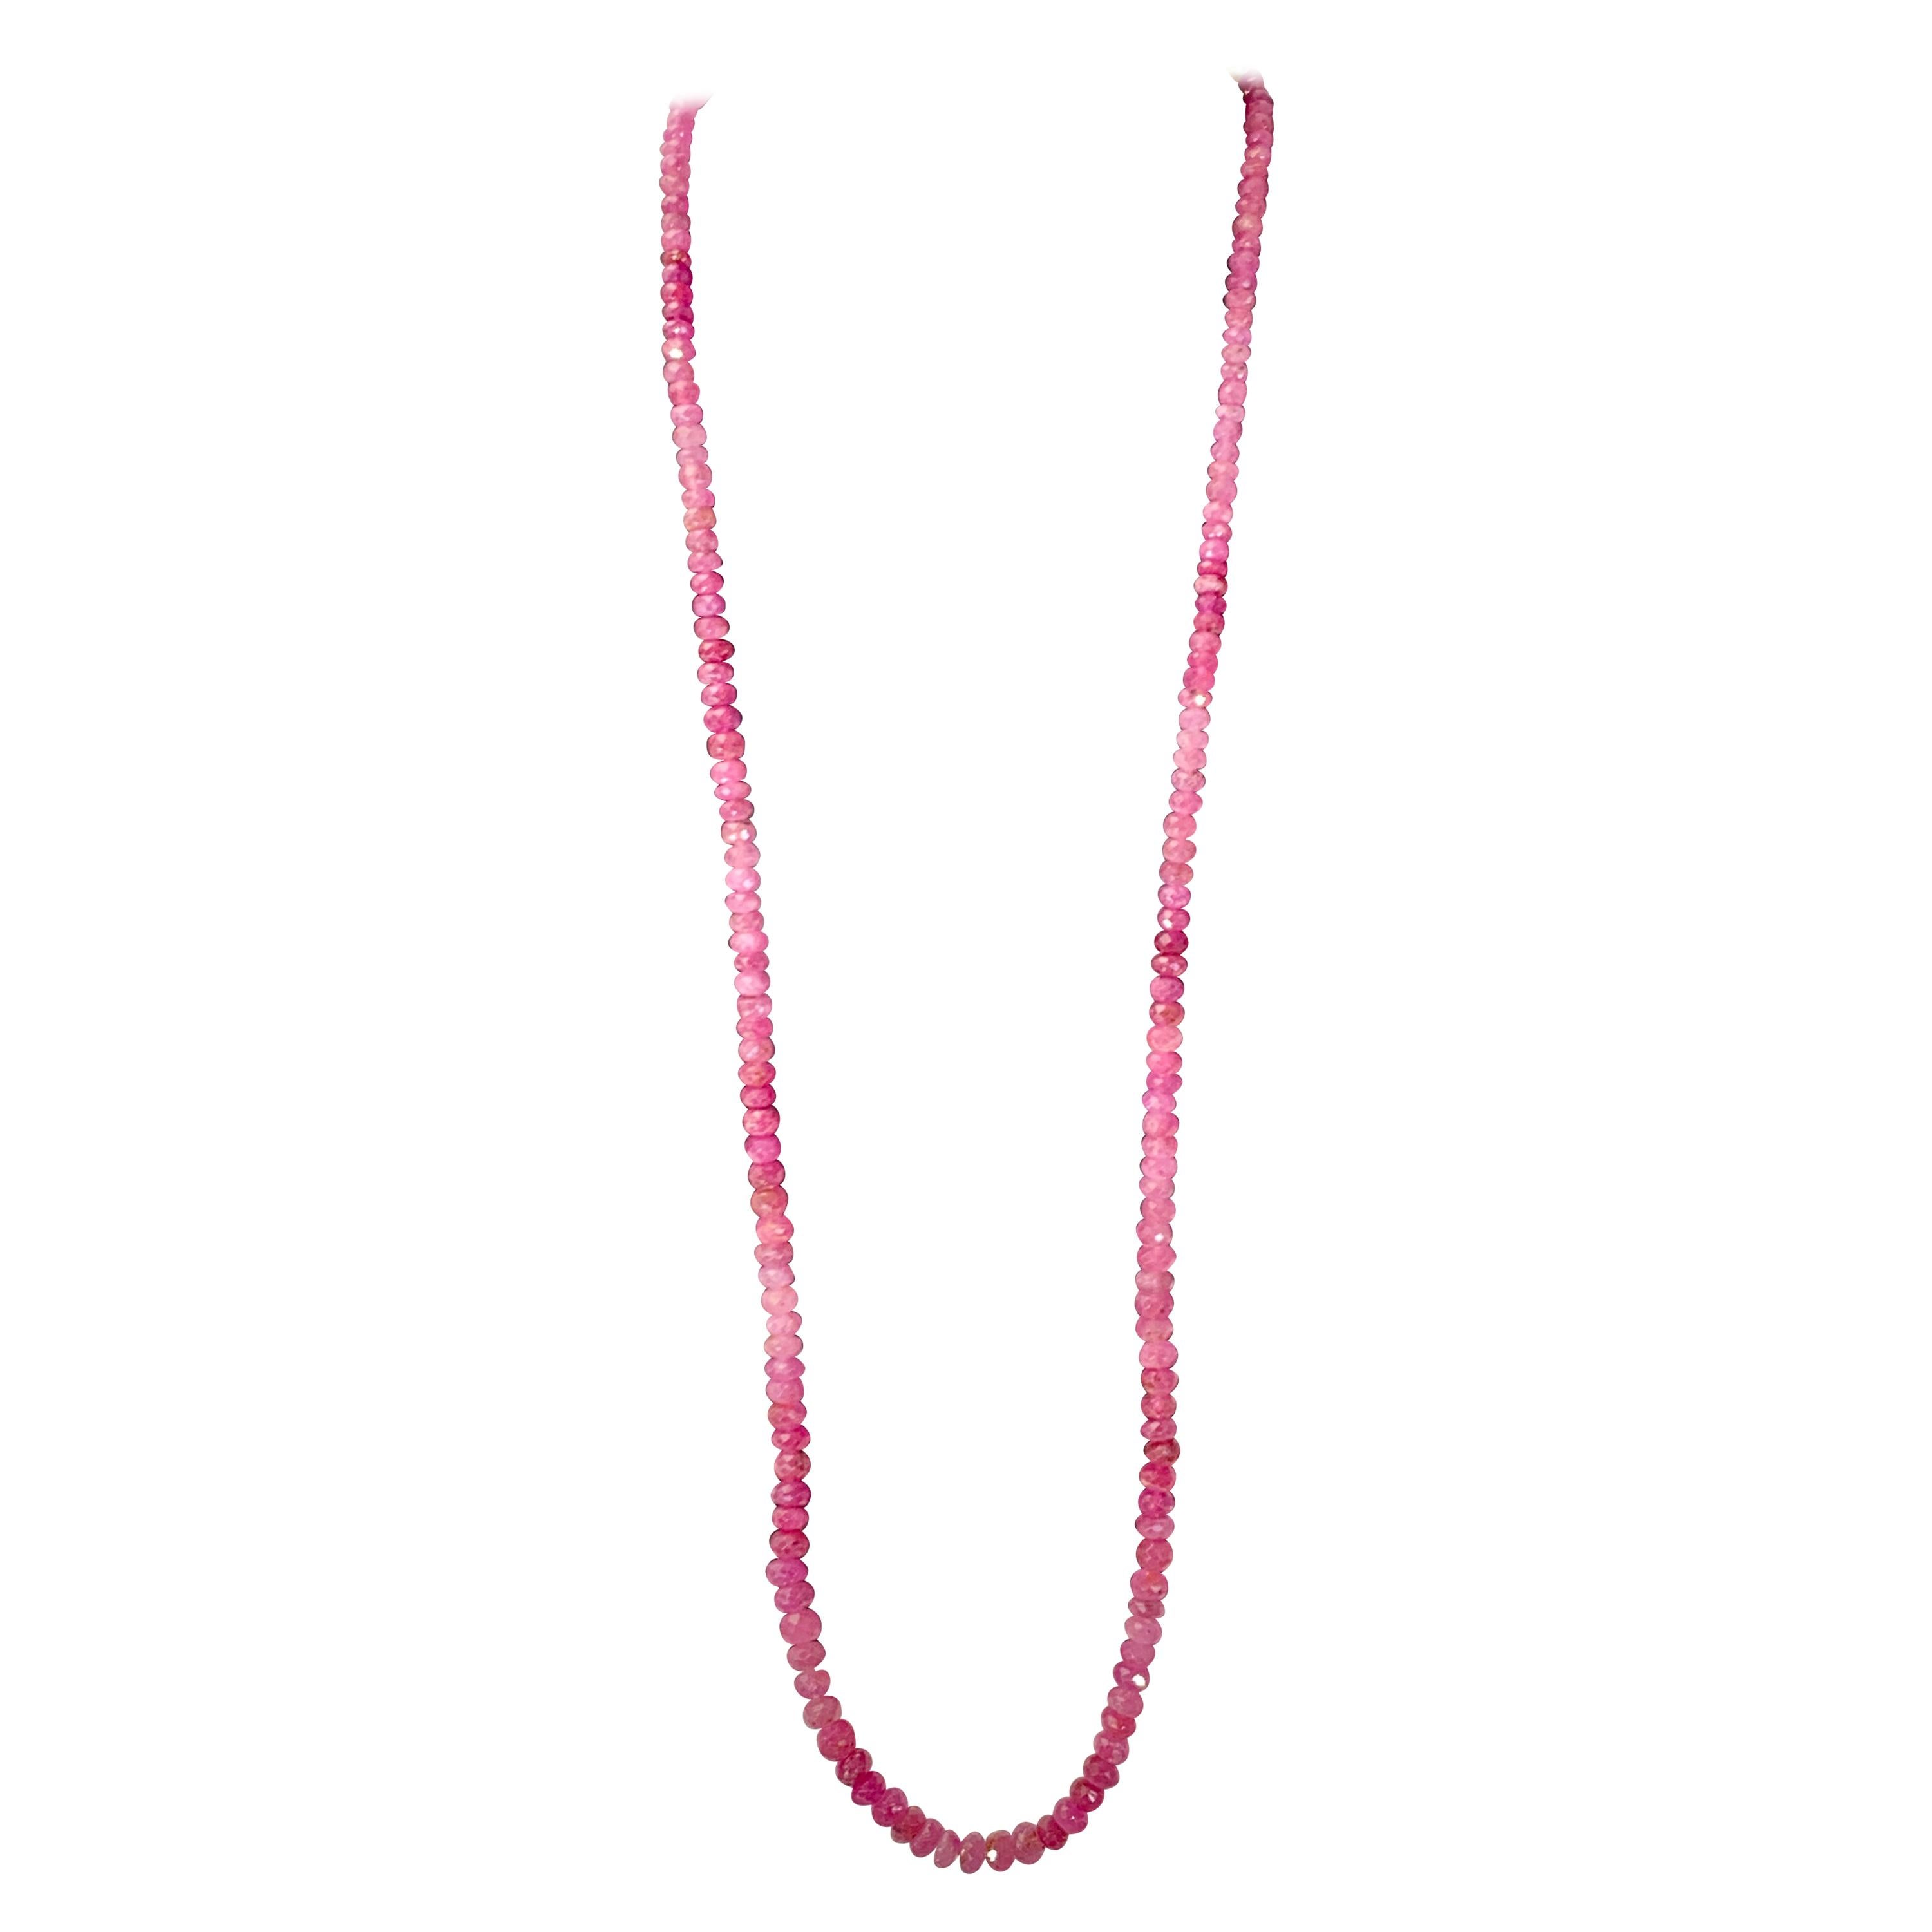 Natural 140 Carat Natural Ruby Bead Single Strand Necklace with Silver Clasp For Sale